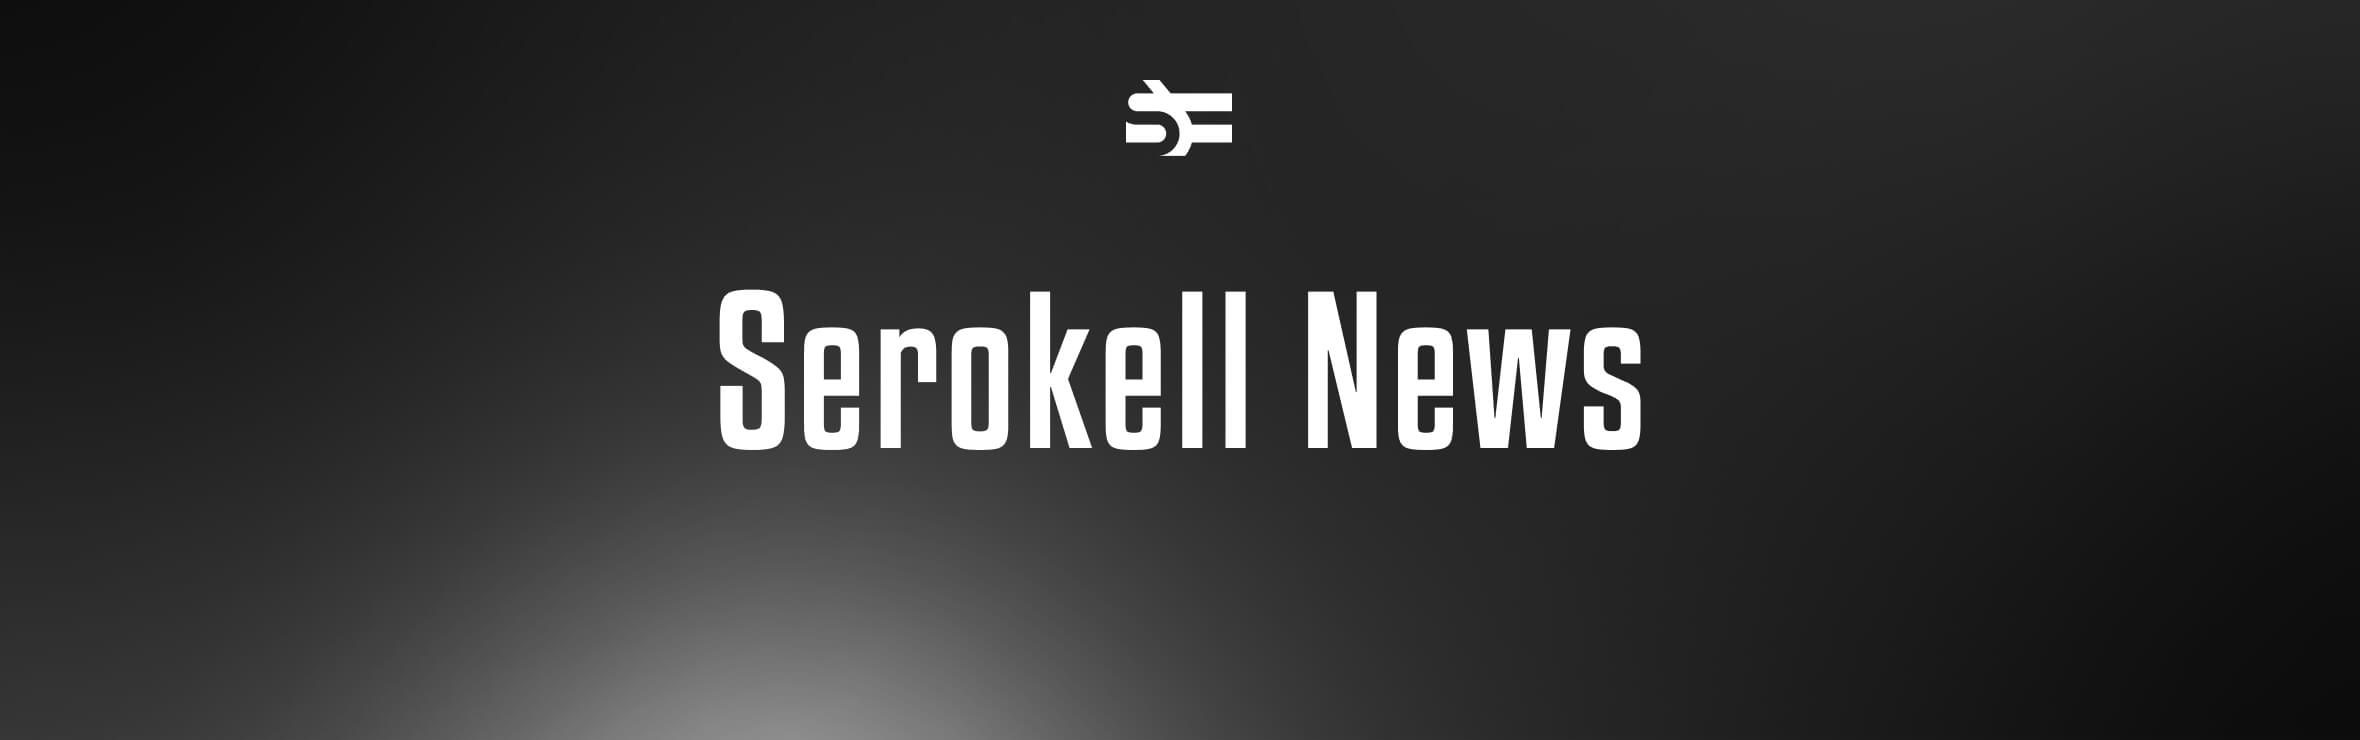 Serokell on top sofware developers listing